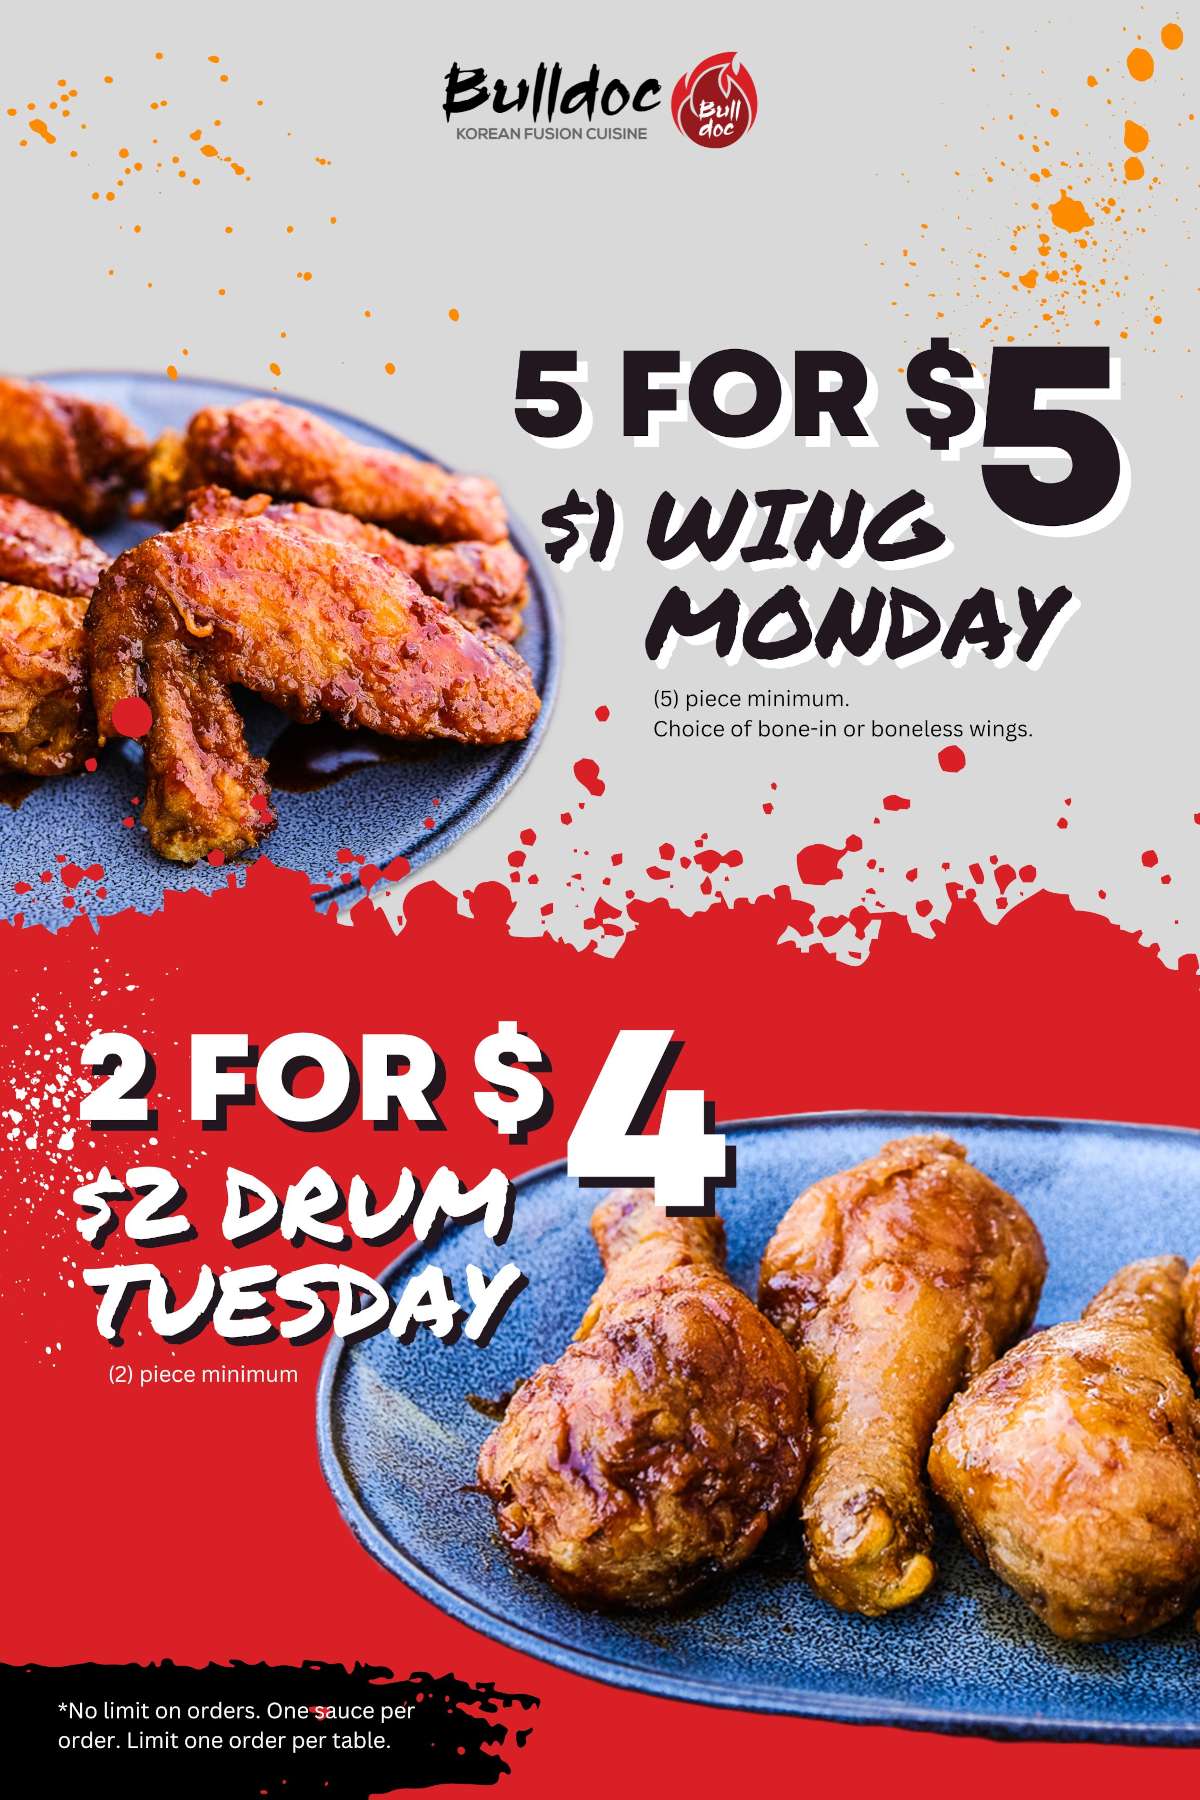 Bulldoc wing Monday and drum Tuesday specials